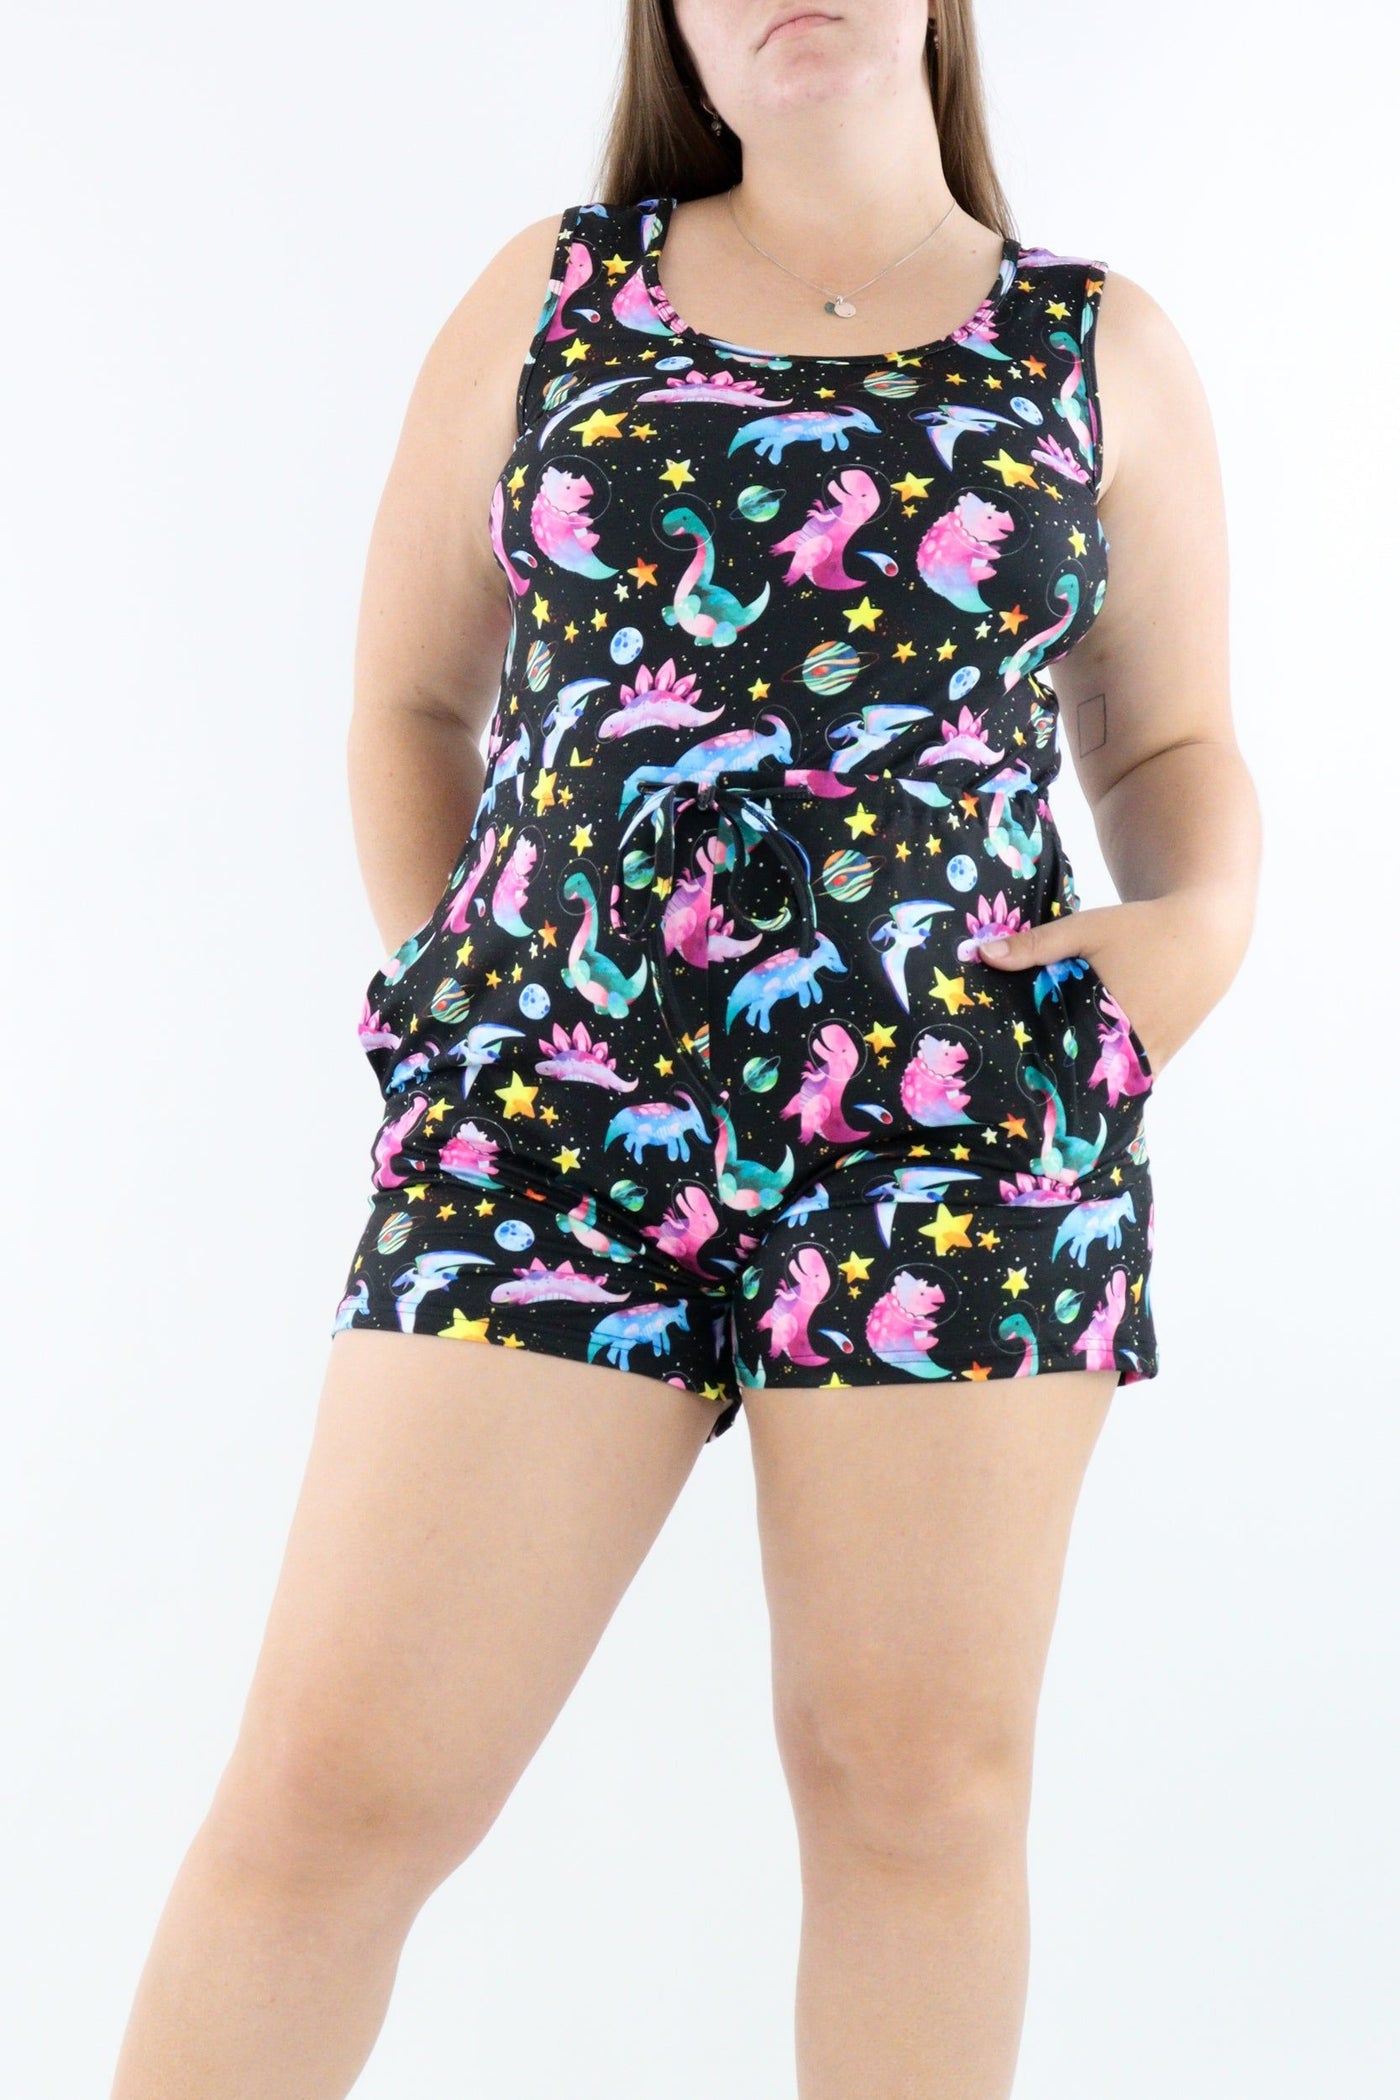 Dinosaurs in Space - Playsuit Shorts - Sleeveless - Pockets